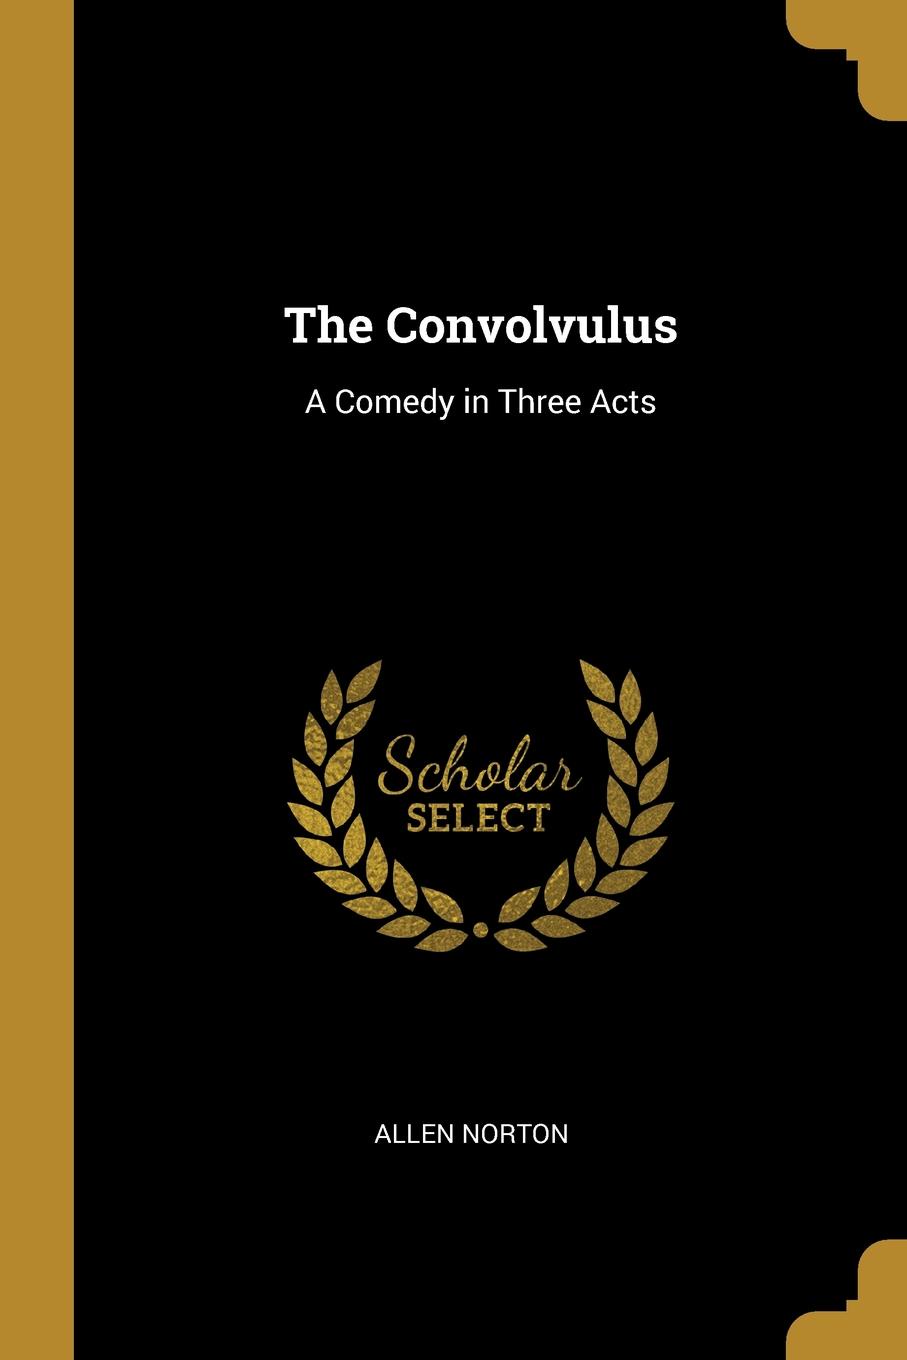 The Convolvulus. A Comedy in Three Acts